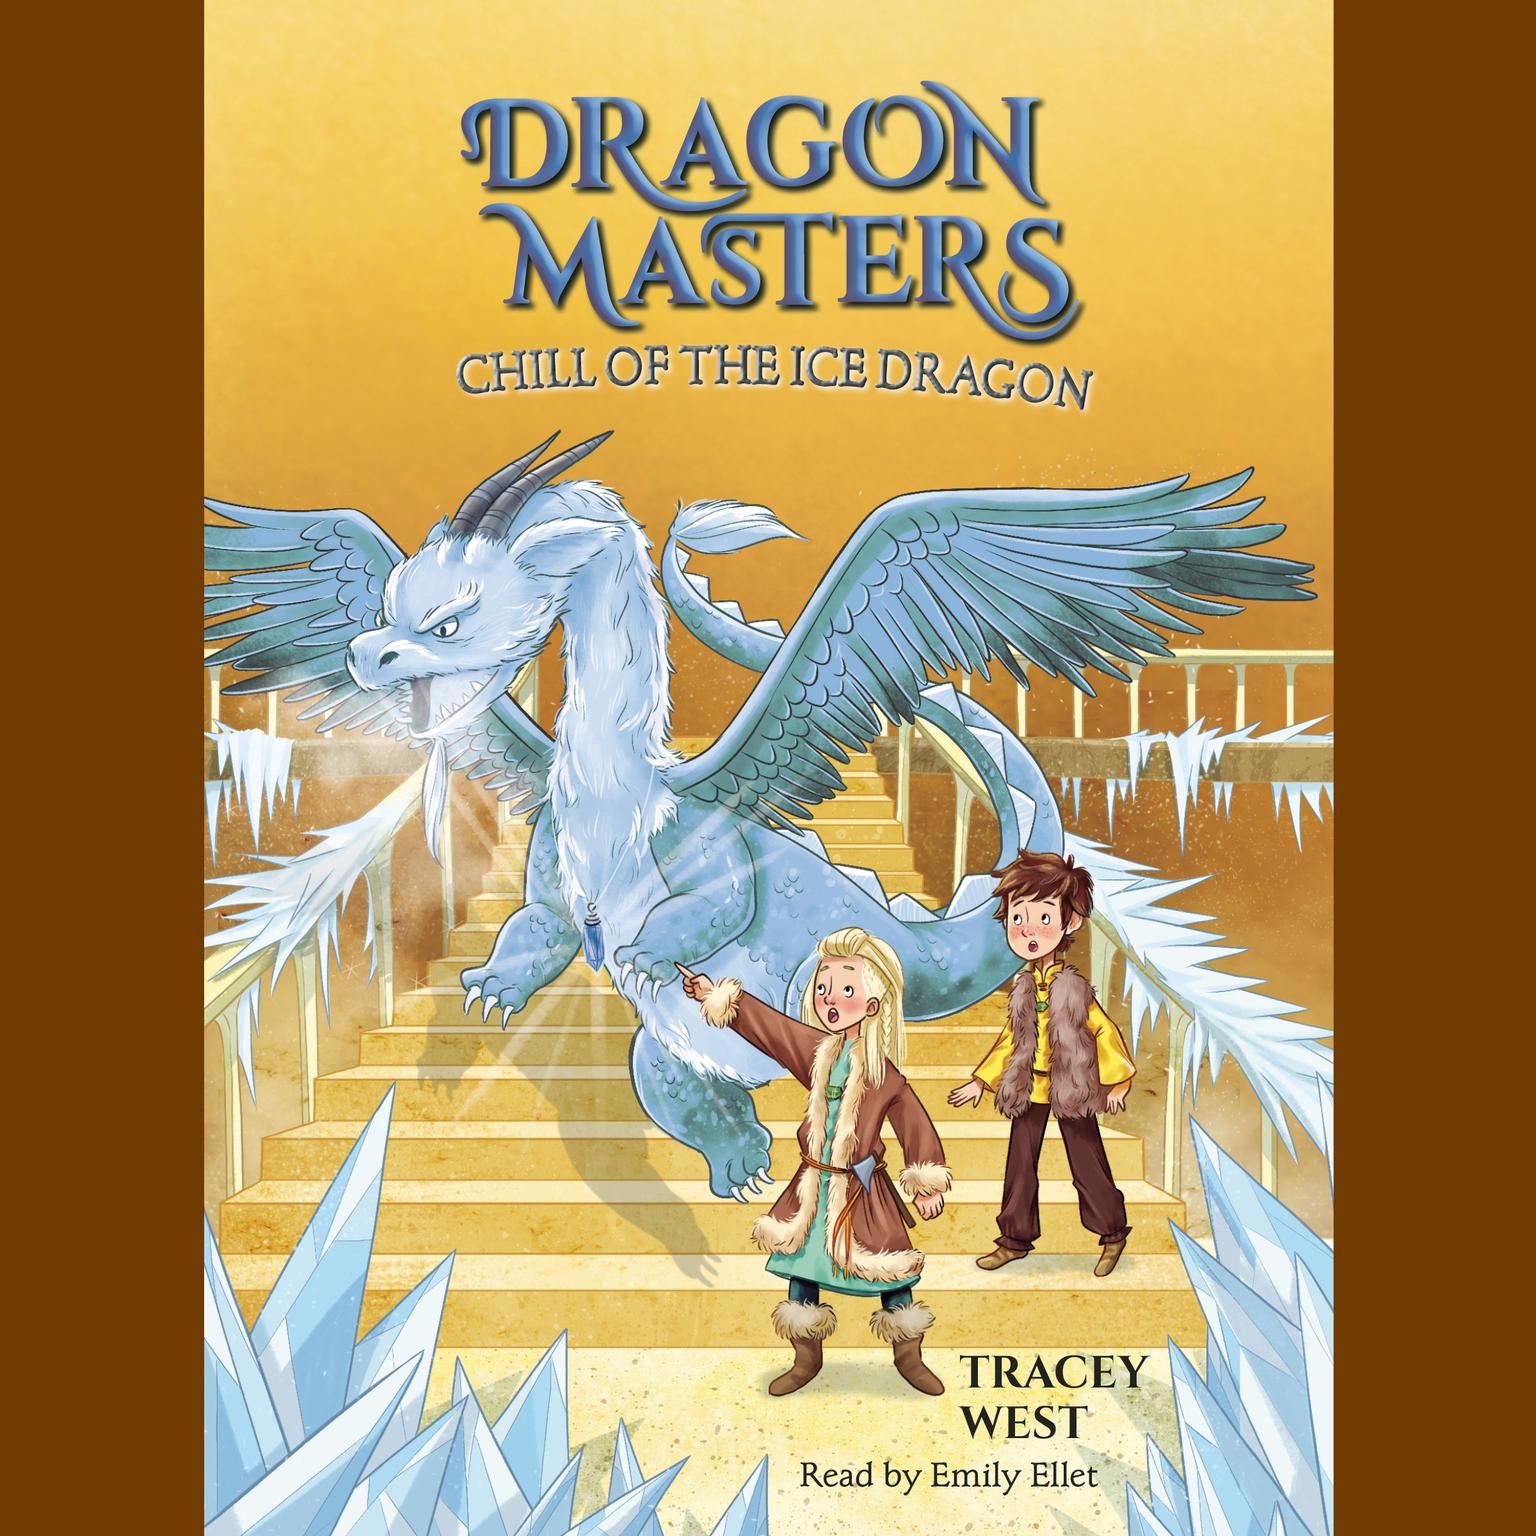 Chill of the Ice Dragon: A Branches Book (Dragon Masters #9) Audiobook, by Tracey West